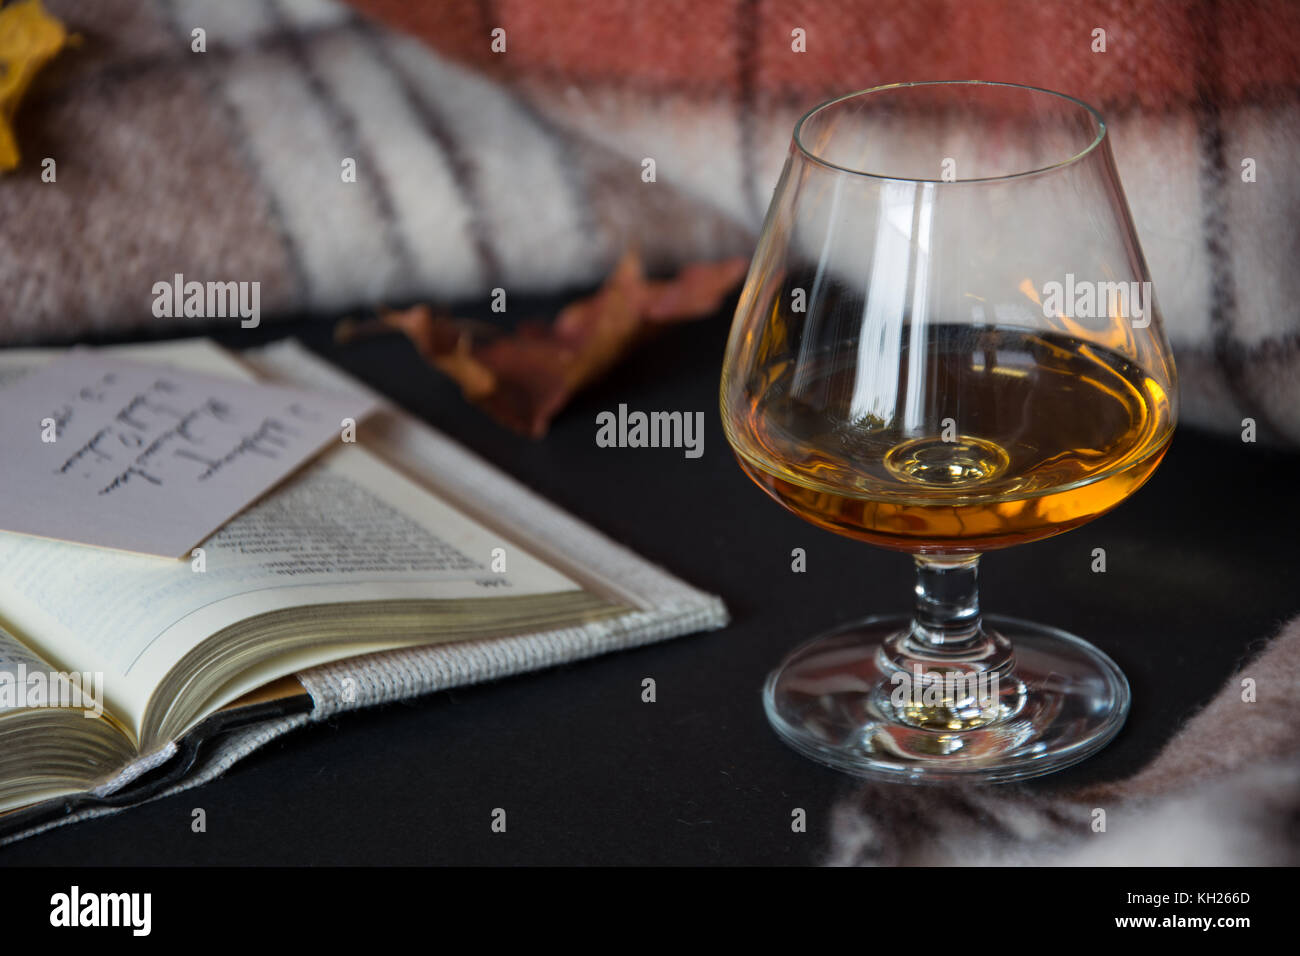 A glass of amber alcohol with an open book, dry leaf and warm blanket in background Stock Photo